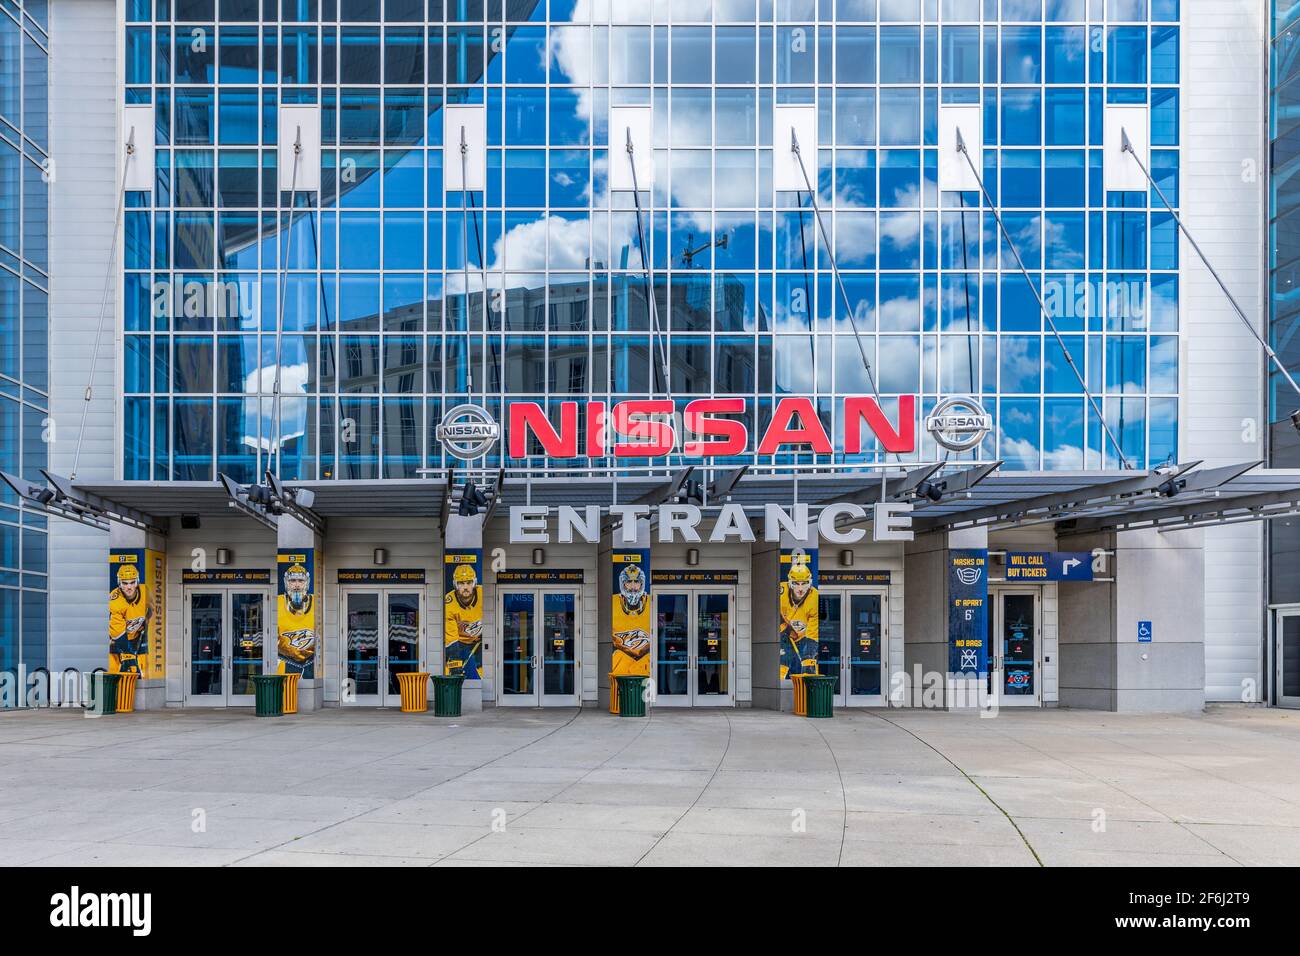 The Bridgestone Arena is home to the Nashville Predators, located in the downtown Nashville. The venue holds hockey games, concerts, and other events. Stock Photo